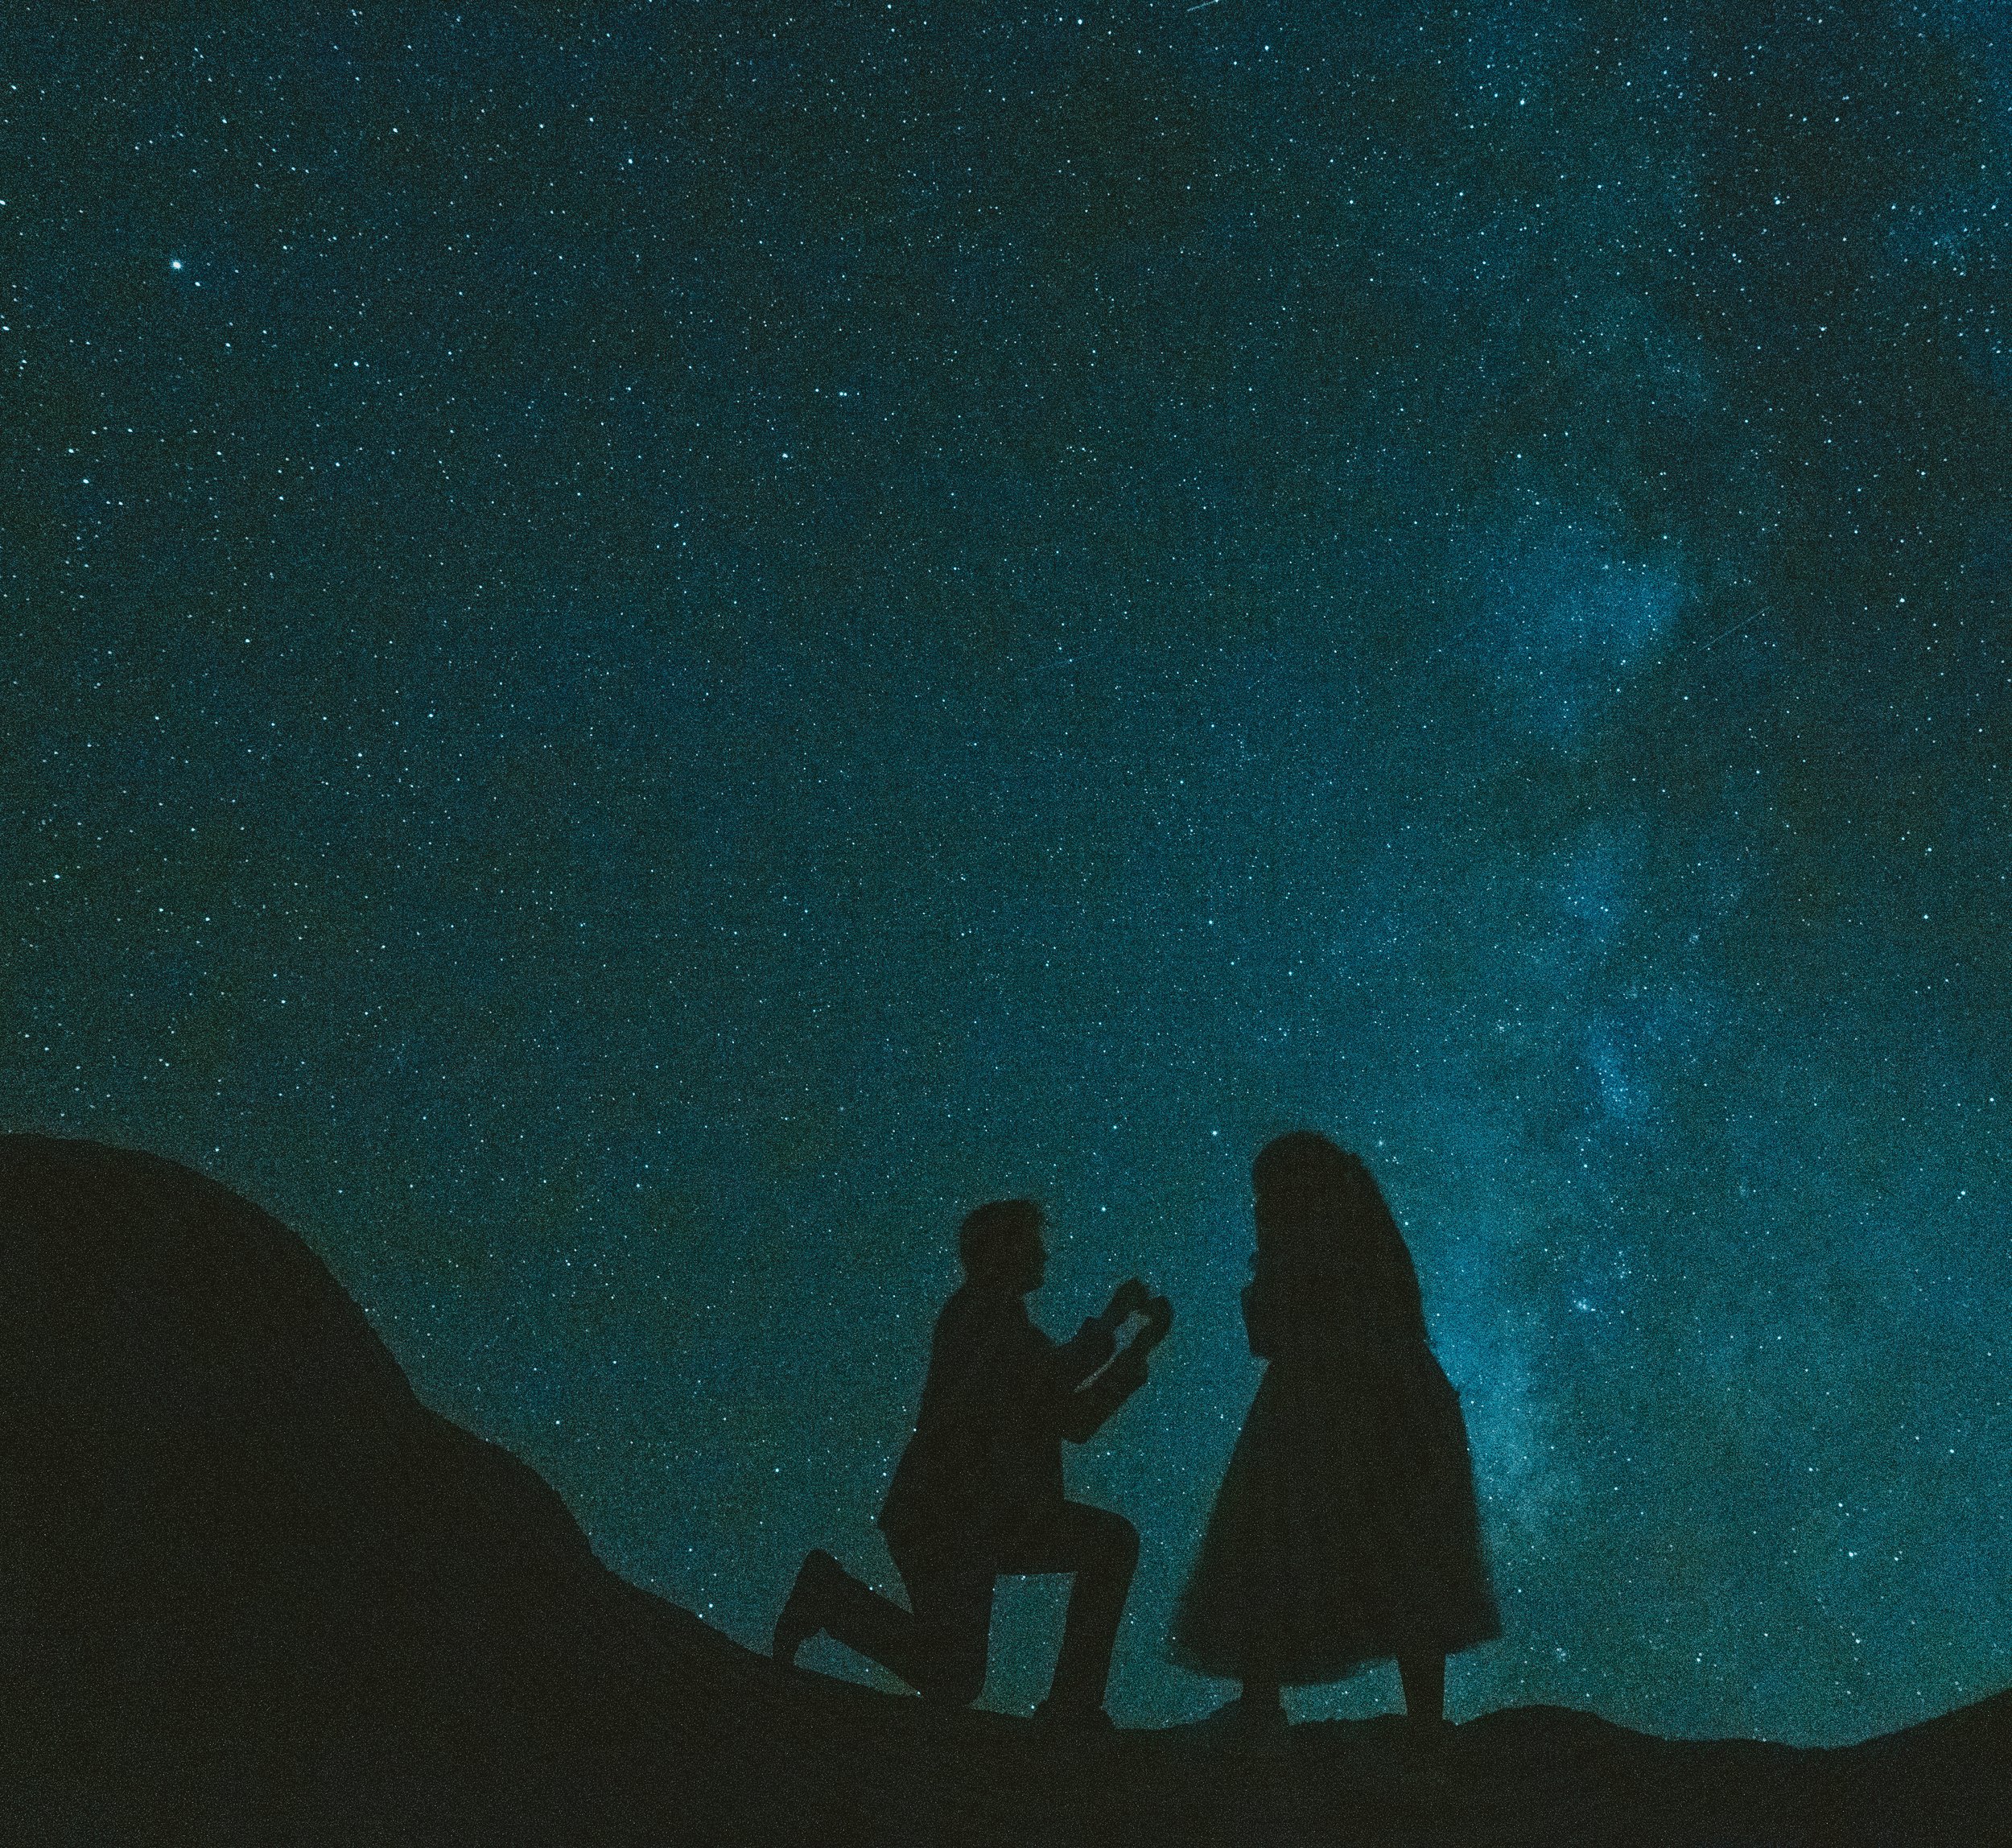 Milky Way Astrophotography Engagement Proposal-58.jpg